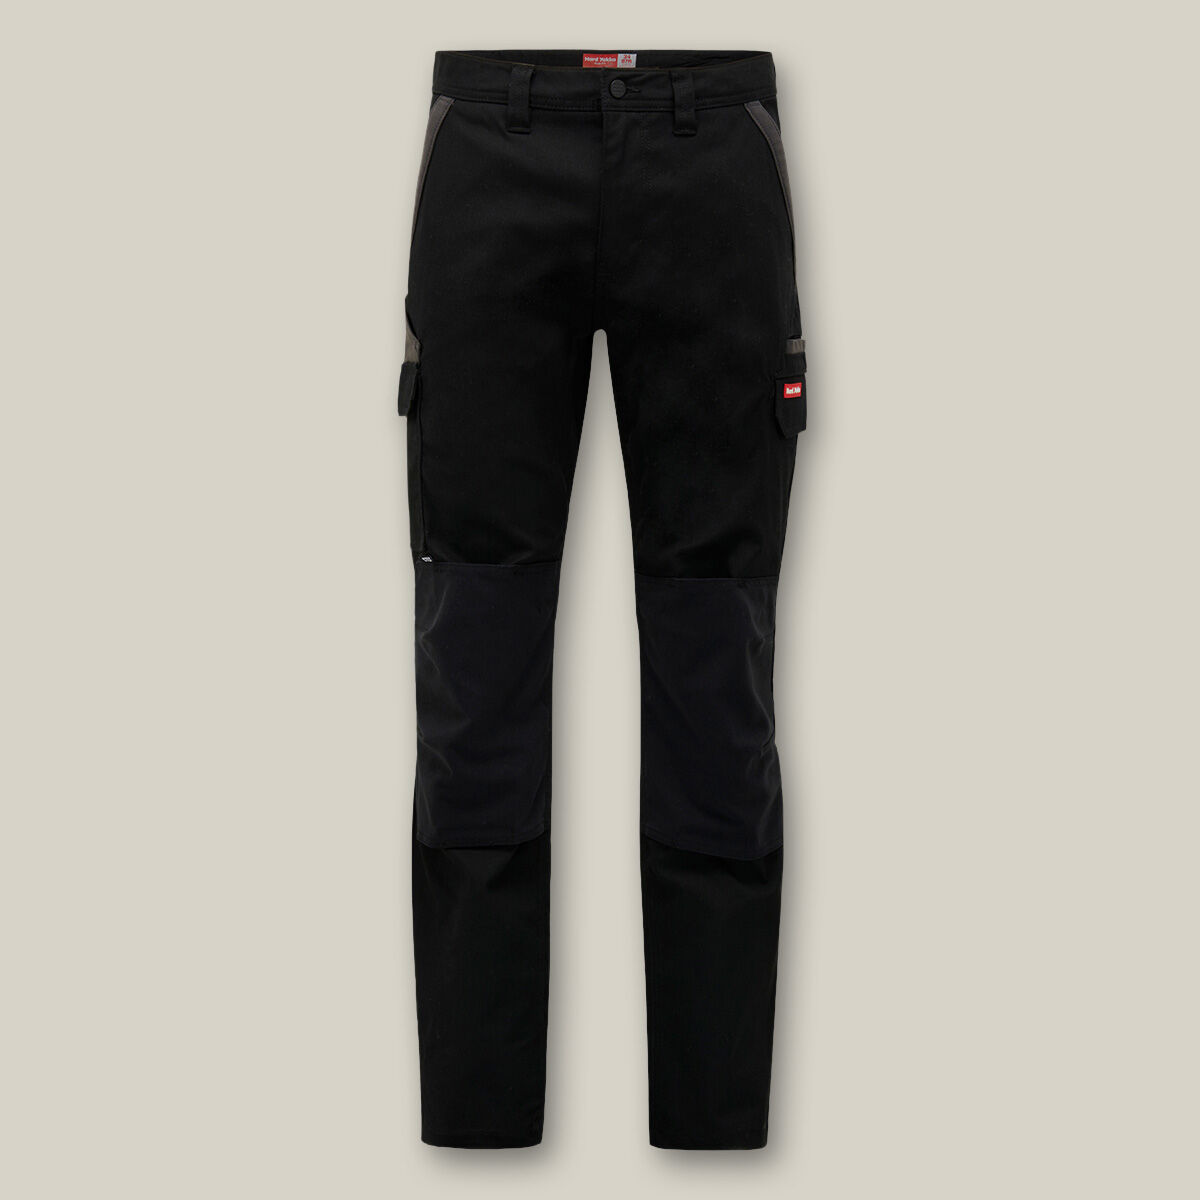 FXD WP-4 Cuffed Work Trousers | FXD Workwear – BIG Boots UK